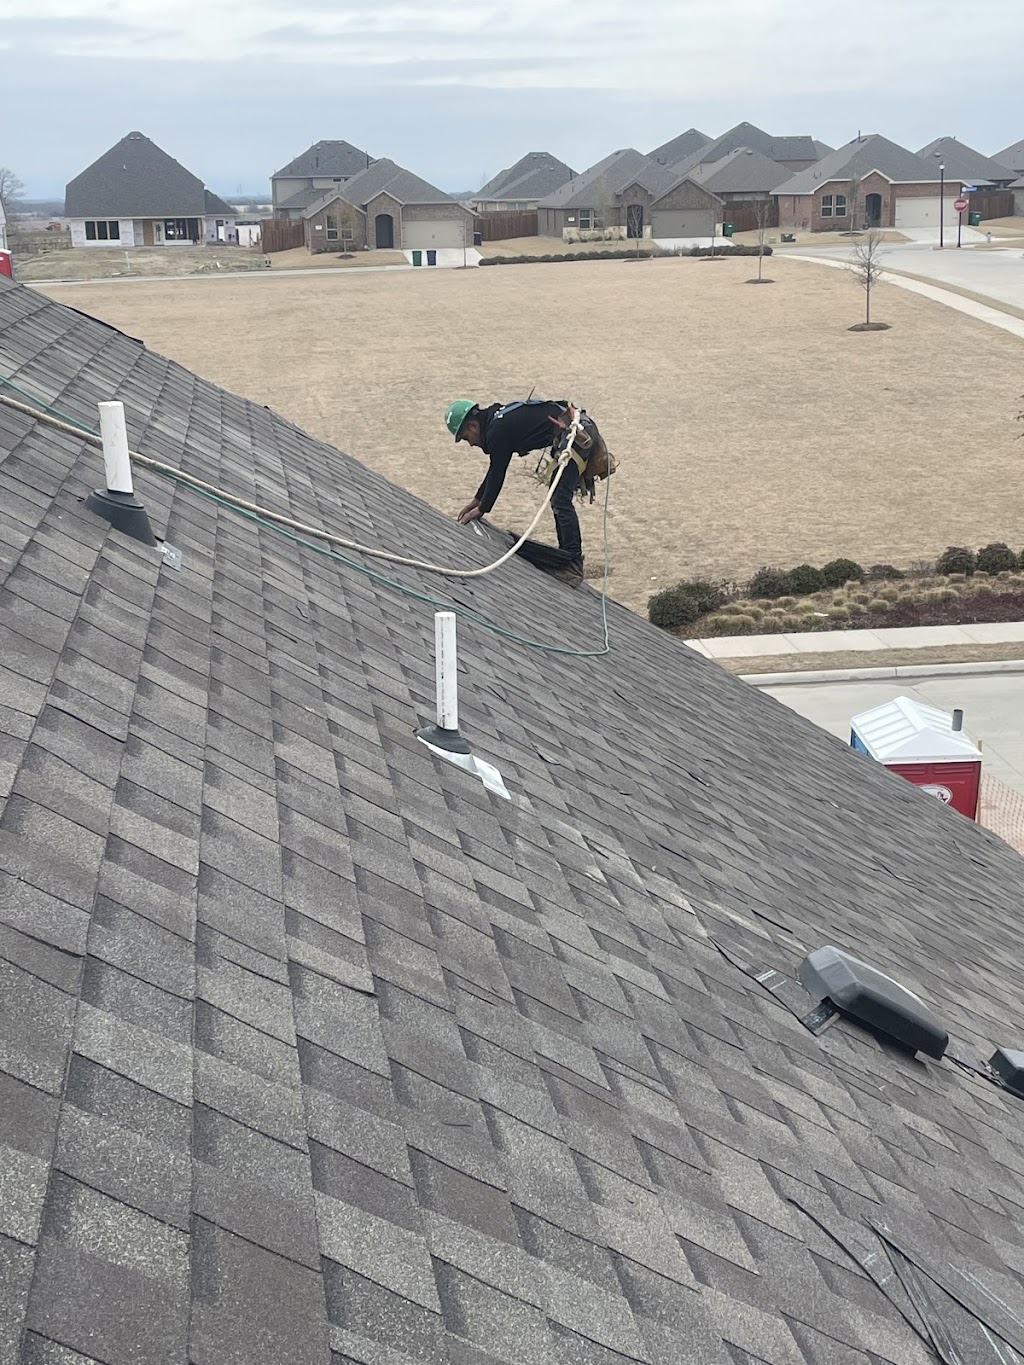 CMAC Roofing | 199 Co Rd 4840, Haslet, TX 76052, USA | Phone: (682) 218-7221